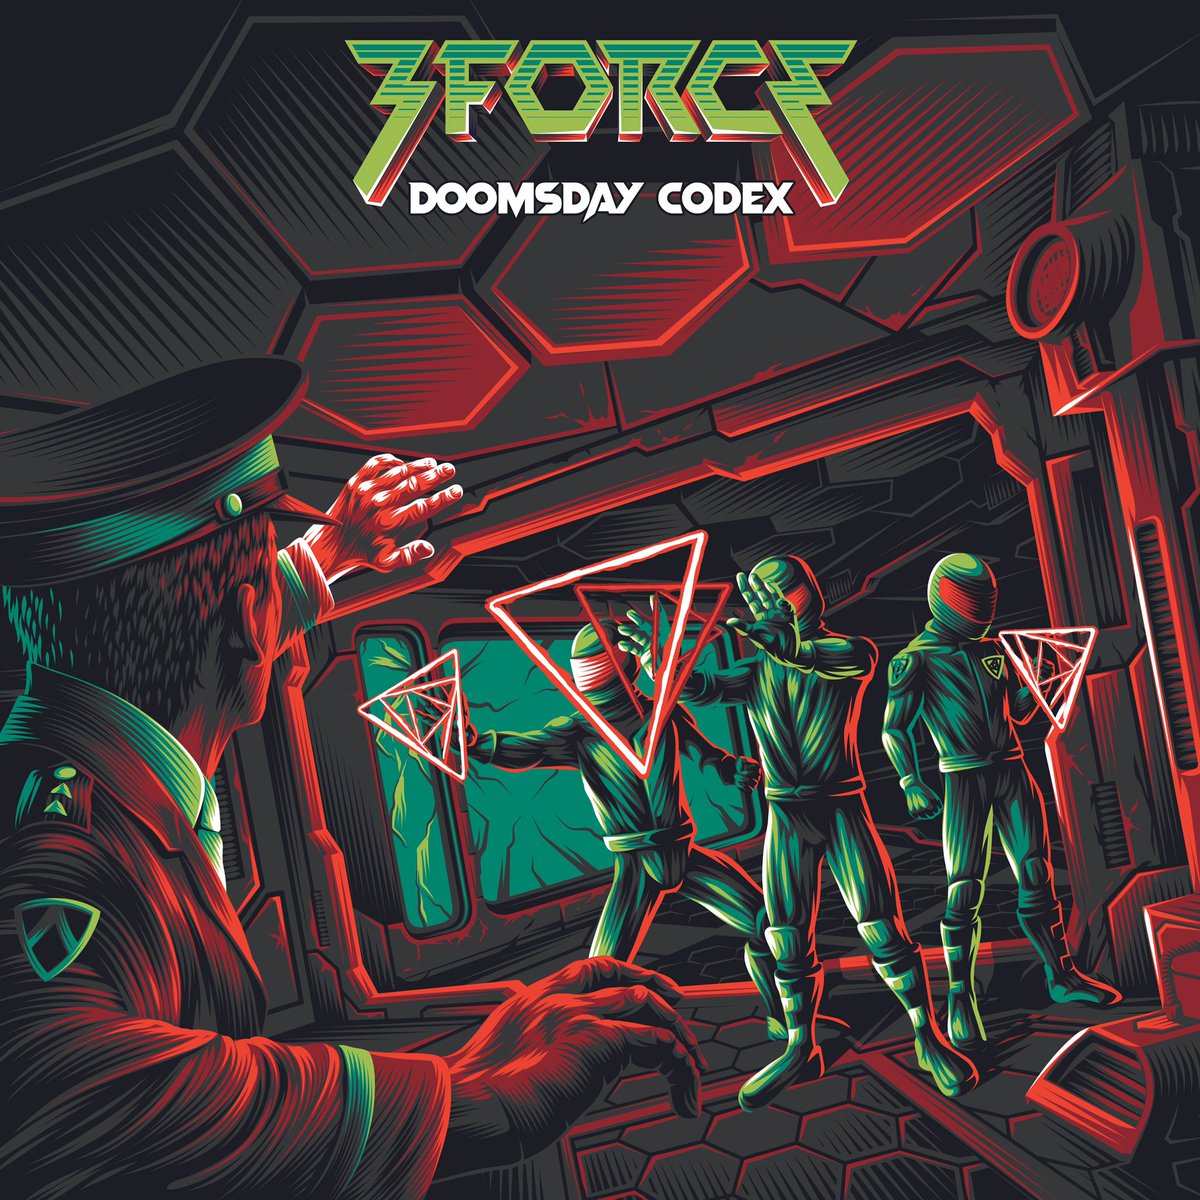 Our new single DOOMSDAY CODEX is out now on all music platforms! Stream/Download: outnow.io/t/ddcodex